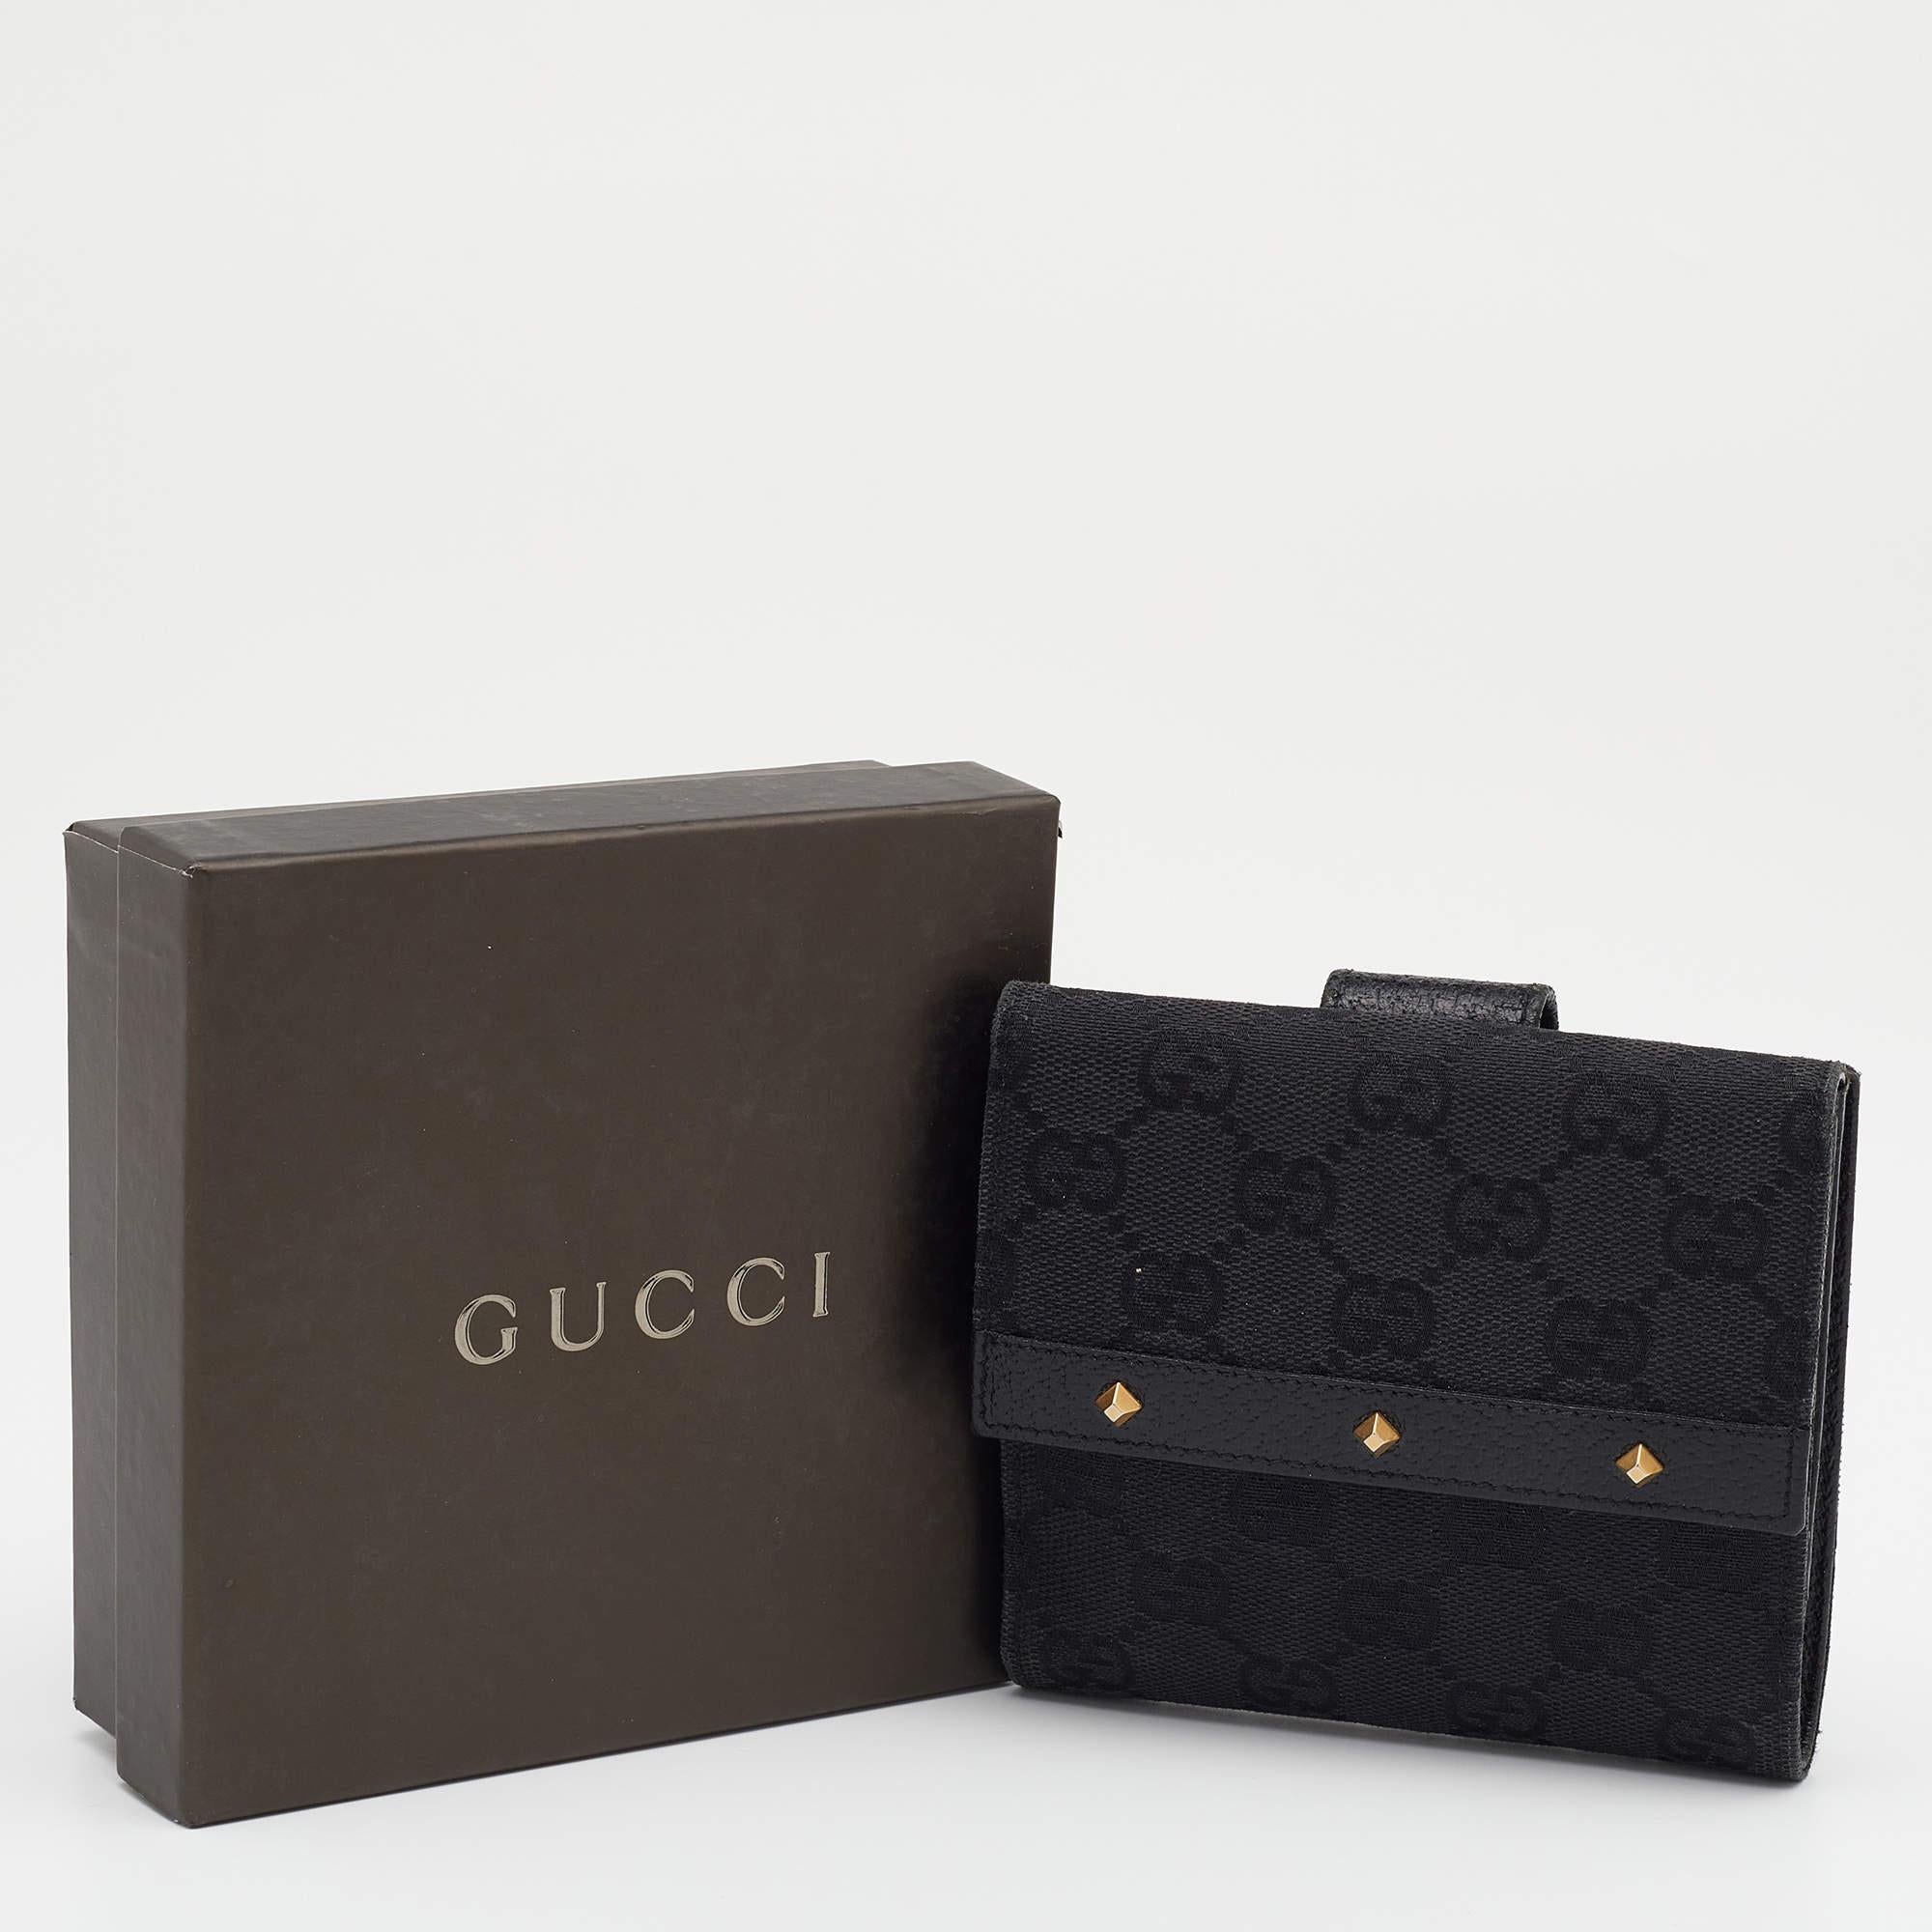 Gucci Black GG Canvas And Leather Flap Studded Compact Wallet 10